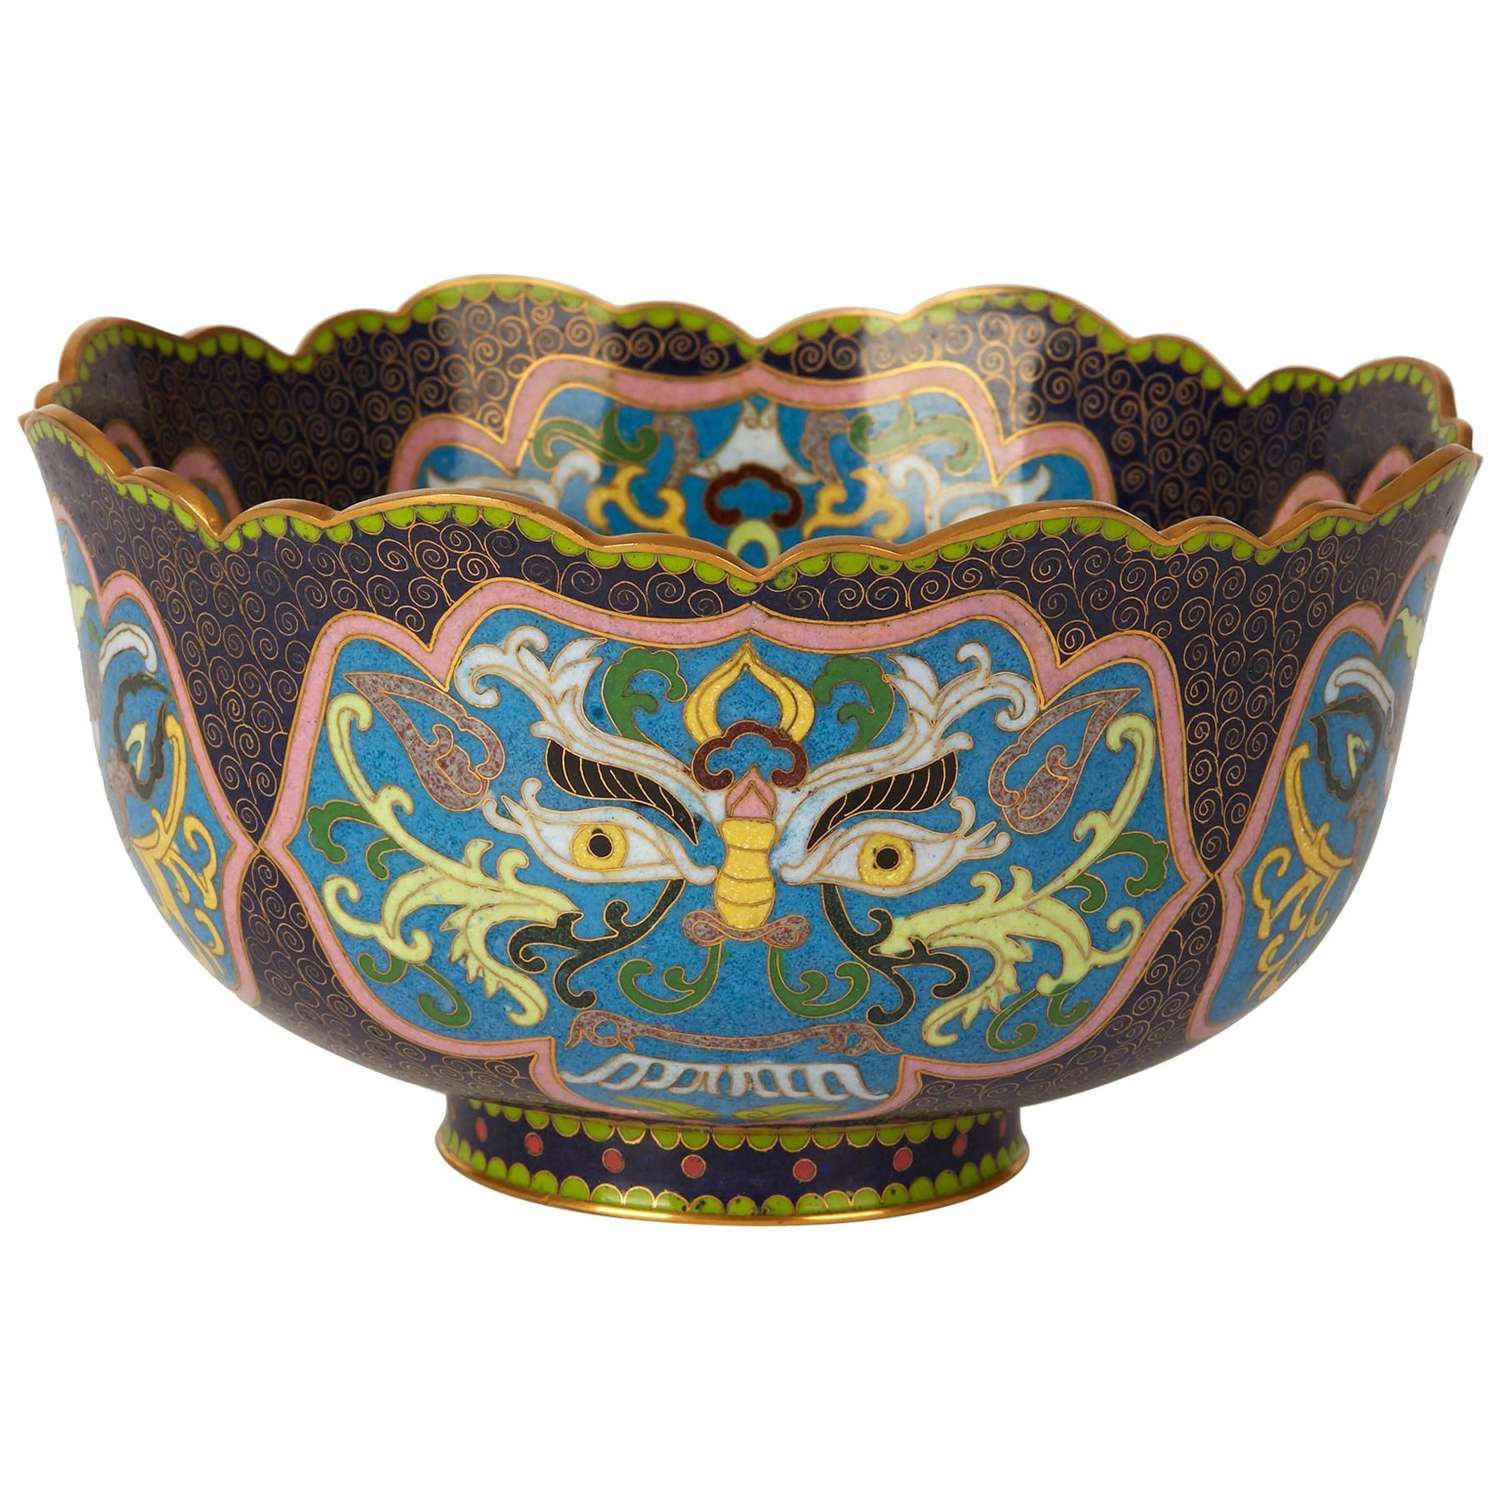 Vintage Chinese Republic Period Cloisonné Bowl, Early 20th Century